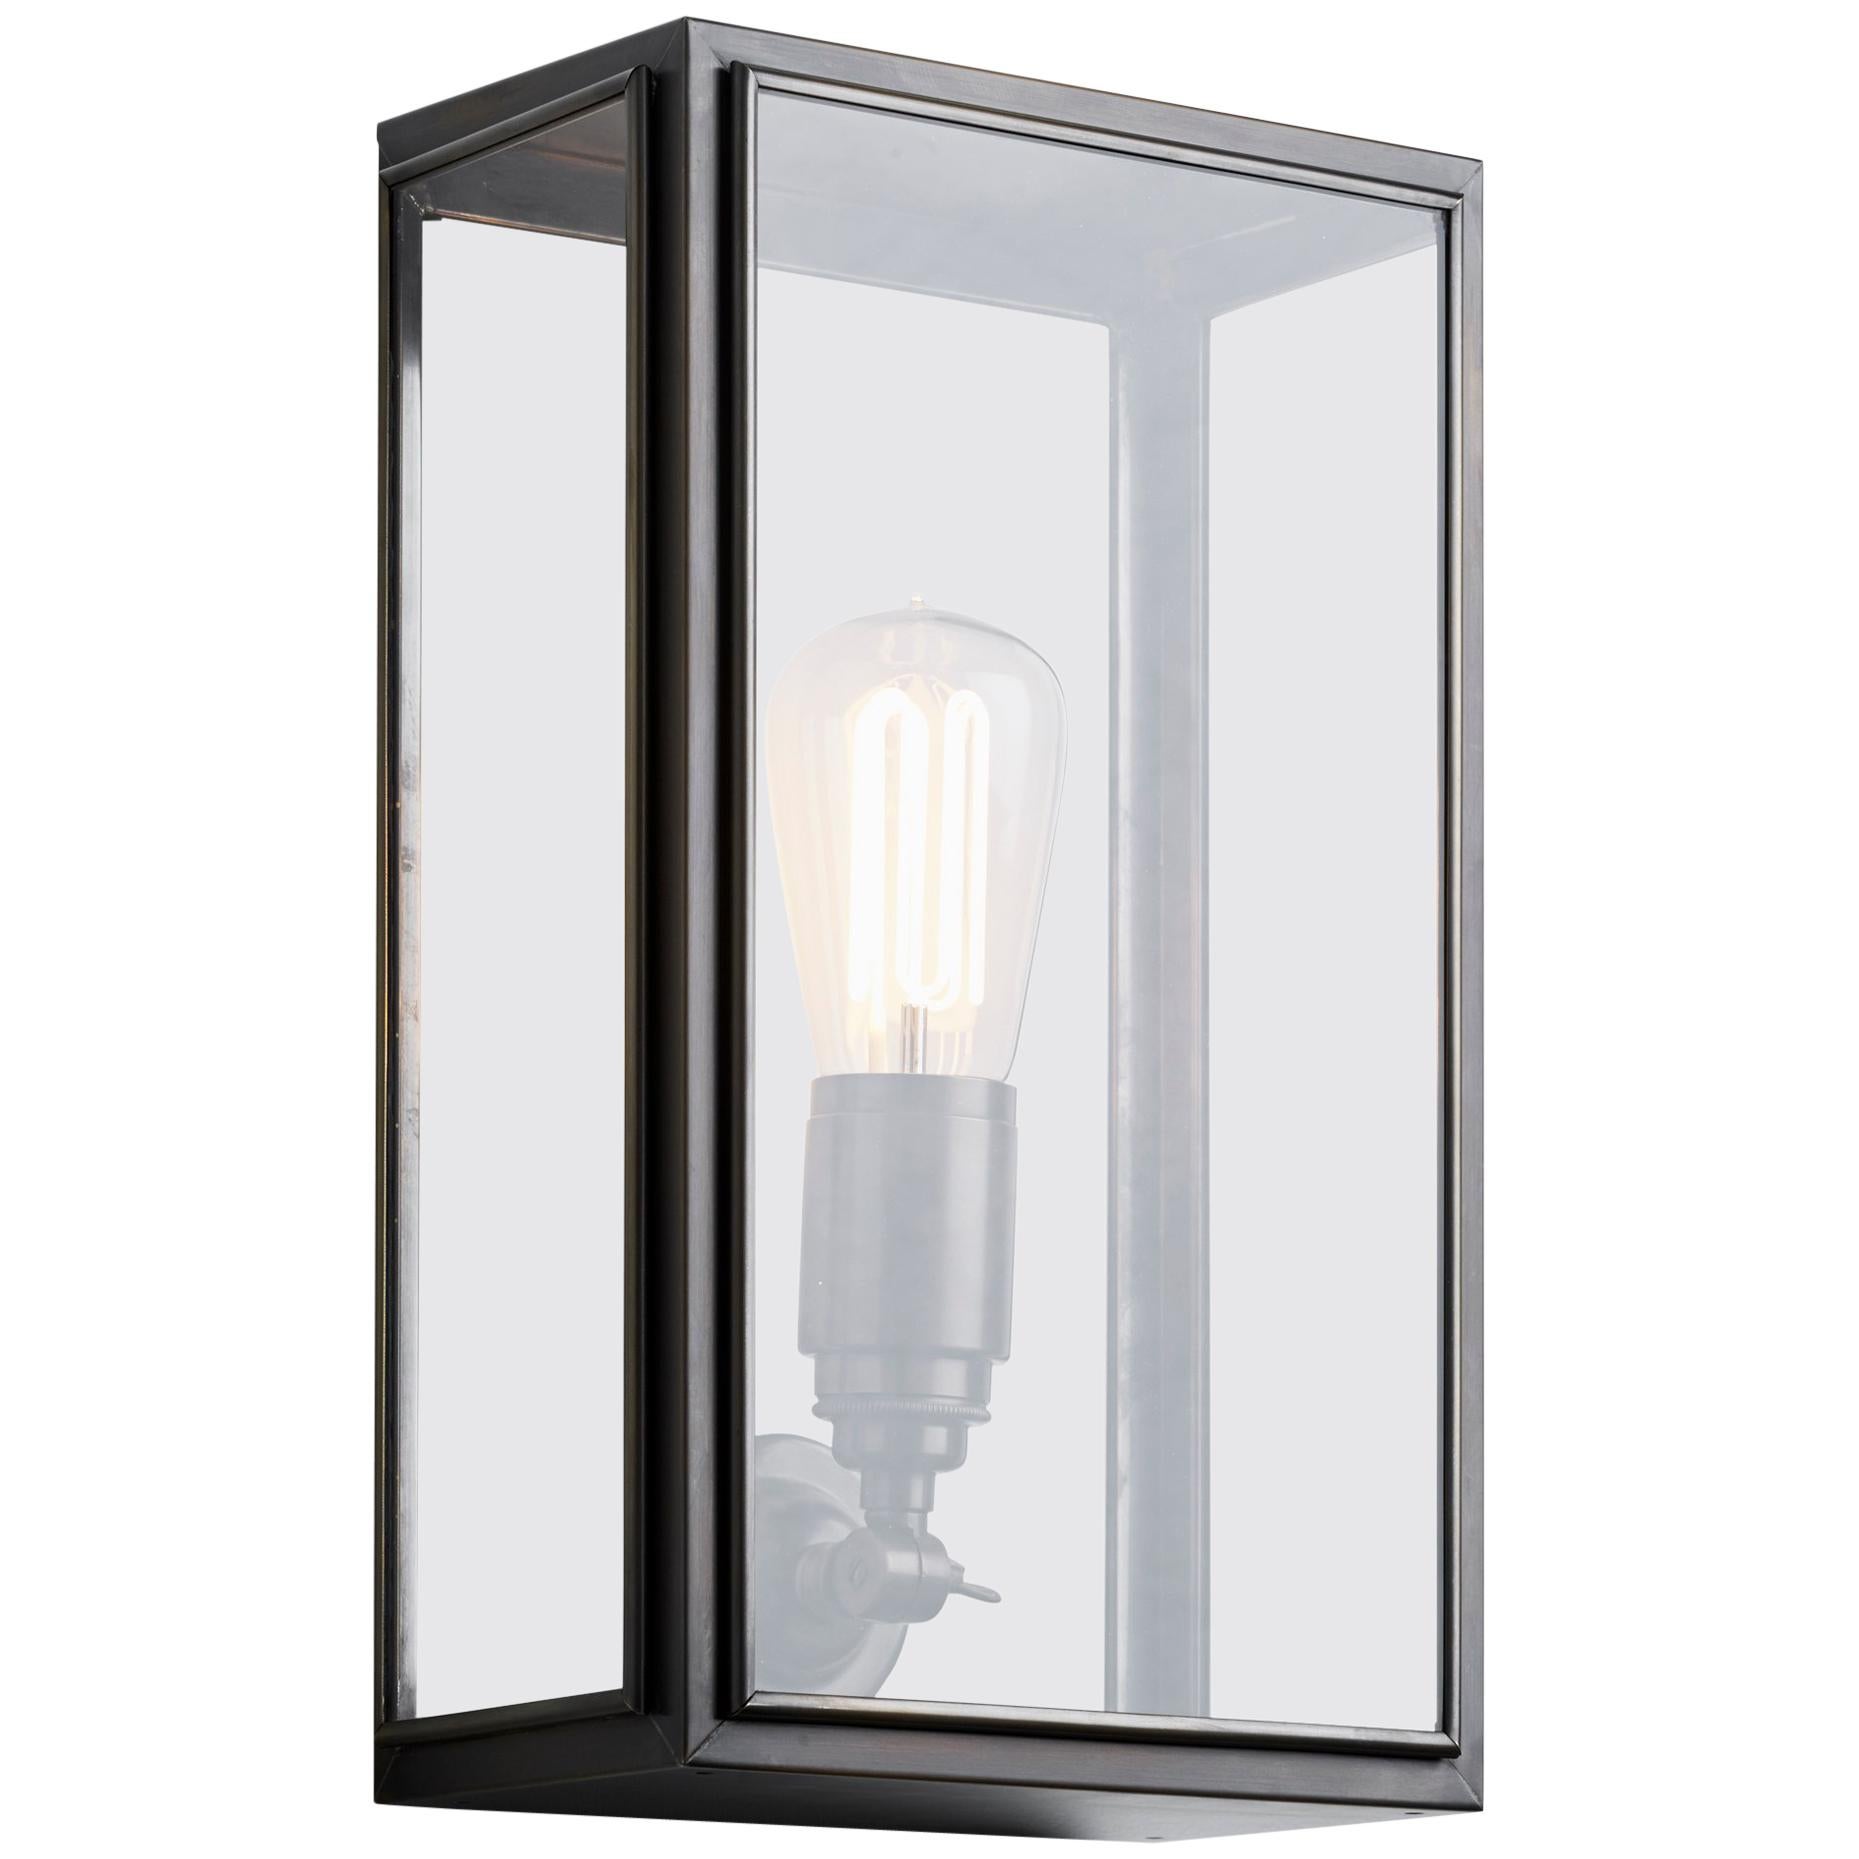 Tekna Essex Original-C Wall Light with Dark Bronze Finish and With Clear Glass For Sale